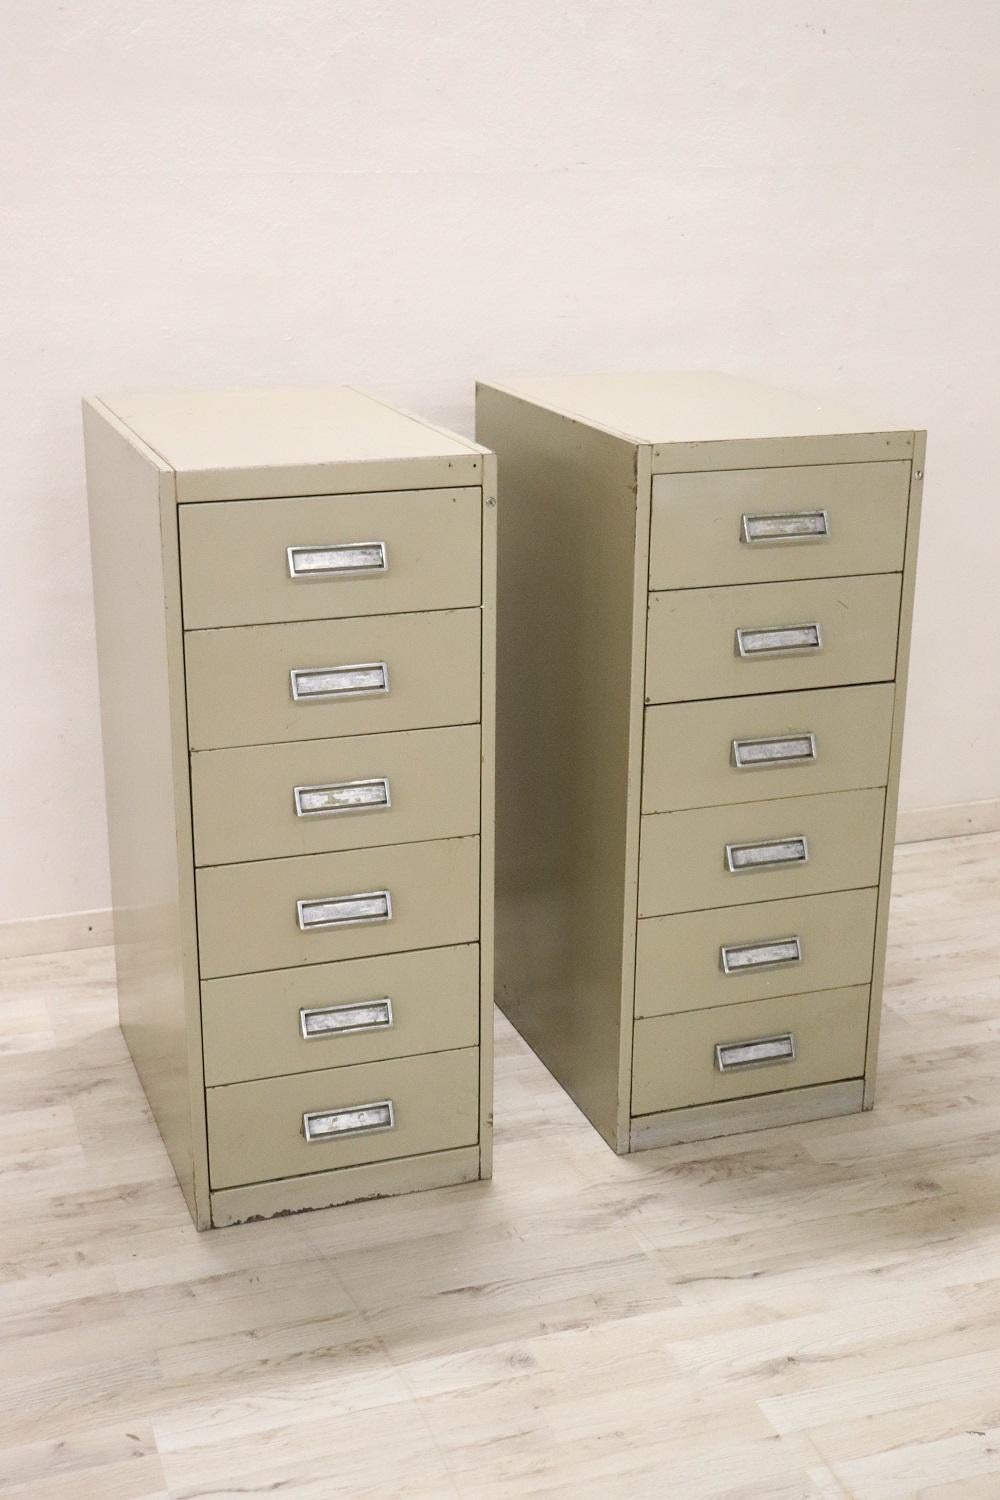 Italian set of two industrial multi drawers metal apothecary, 1970s. Equipped with six comfortable drawers. Condition used. 